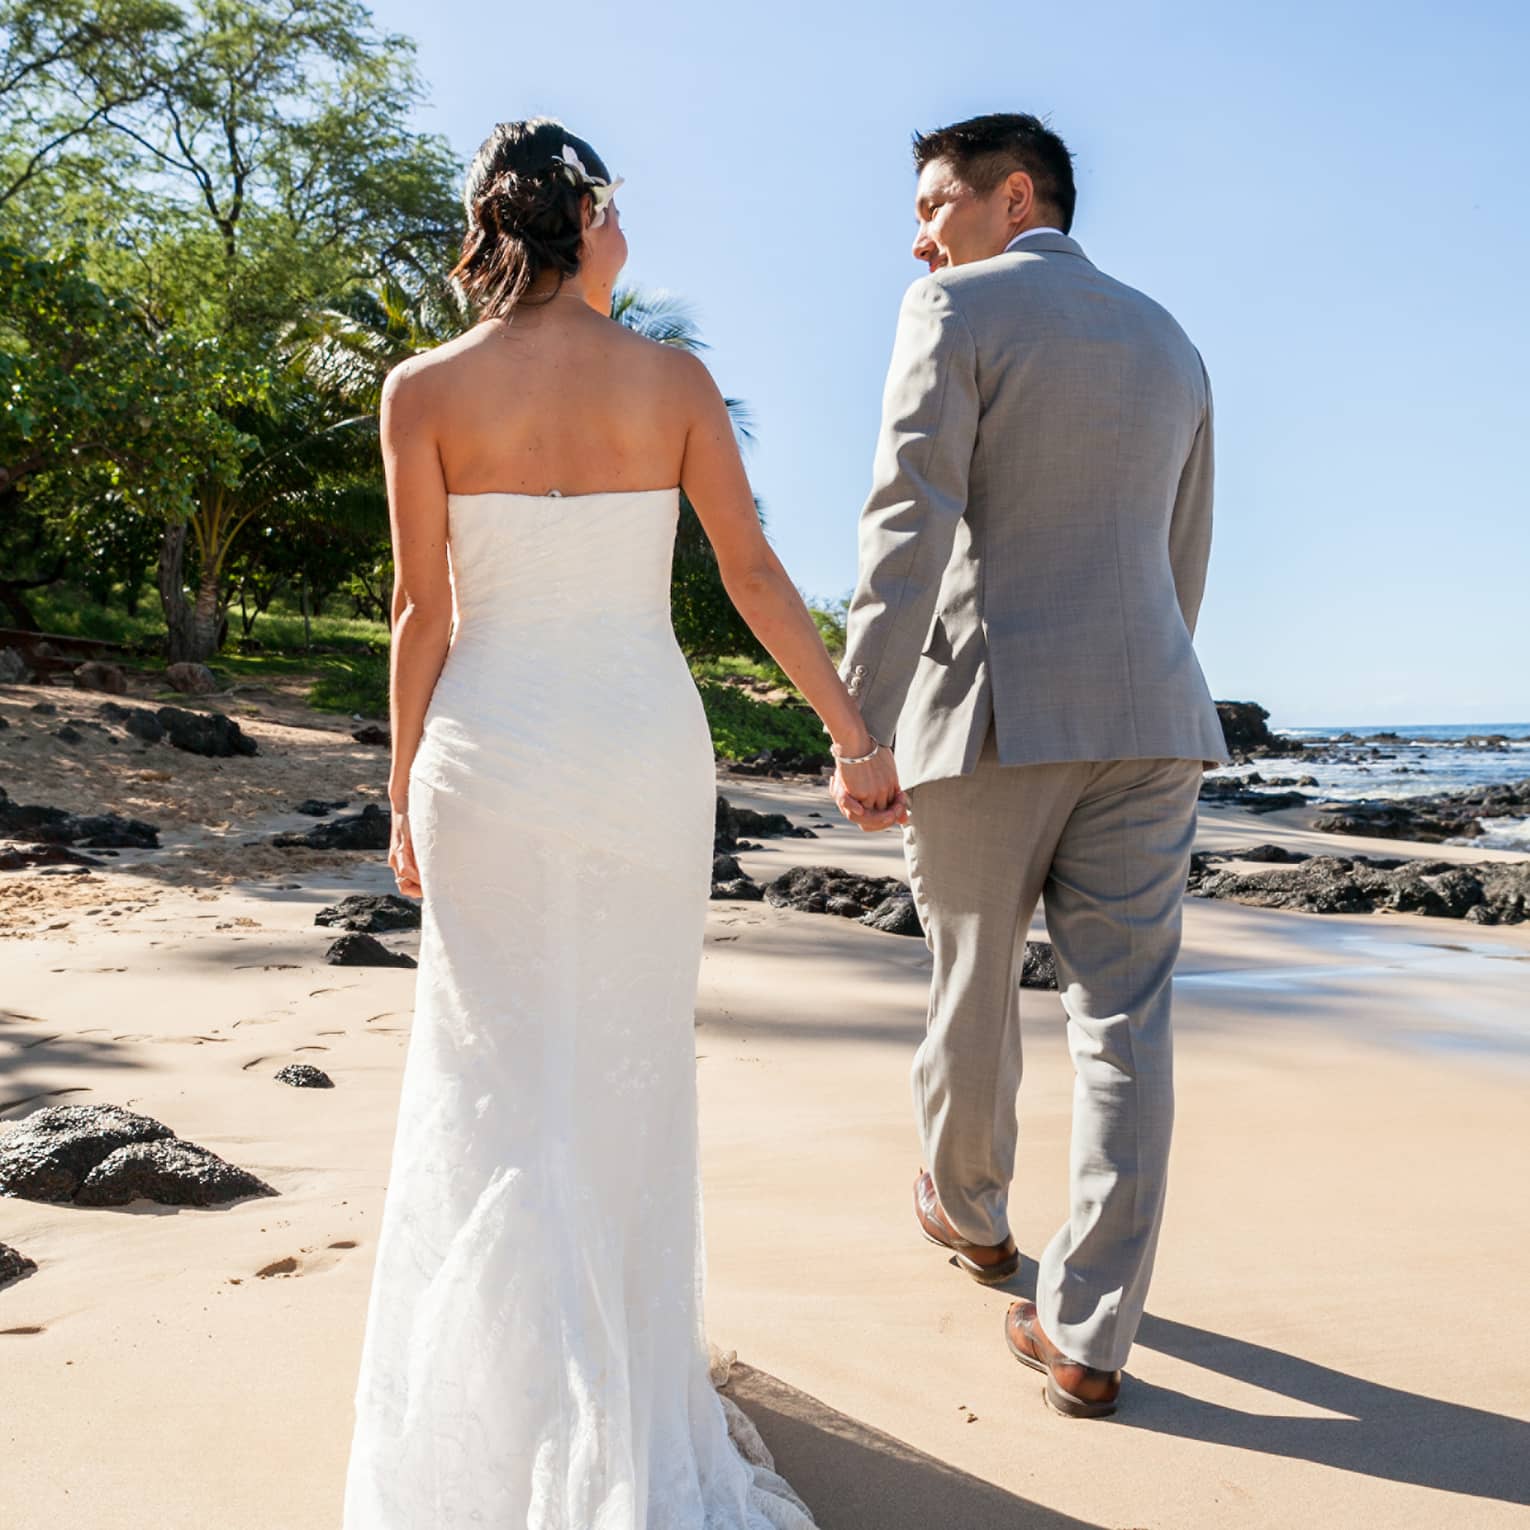 Back of bride and groom as they walk along sand beach